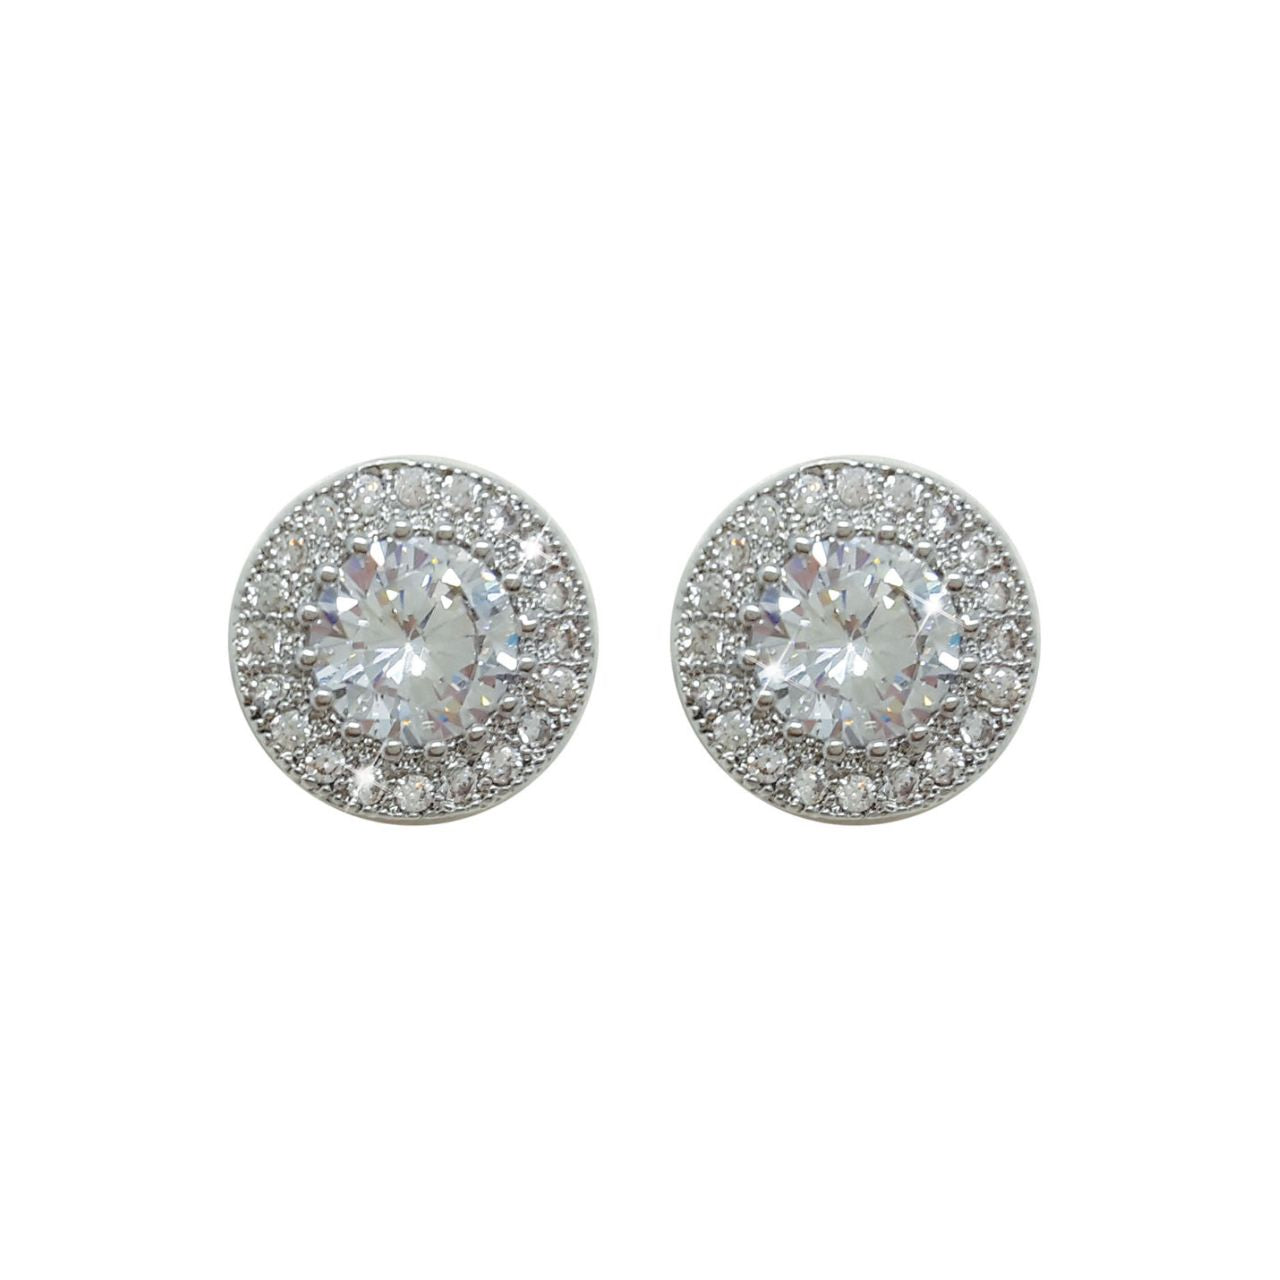 Silver Round Earrings Pave Set Surround by Tipperary Crystal  Perfect for day or evening wear, these elegant pavé set earrings will add sparkle with every turn of the head